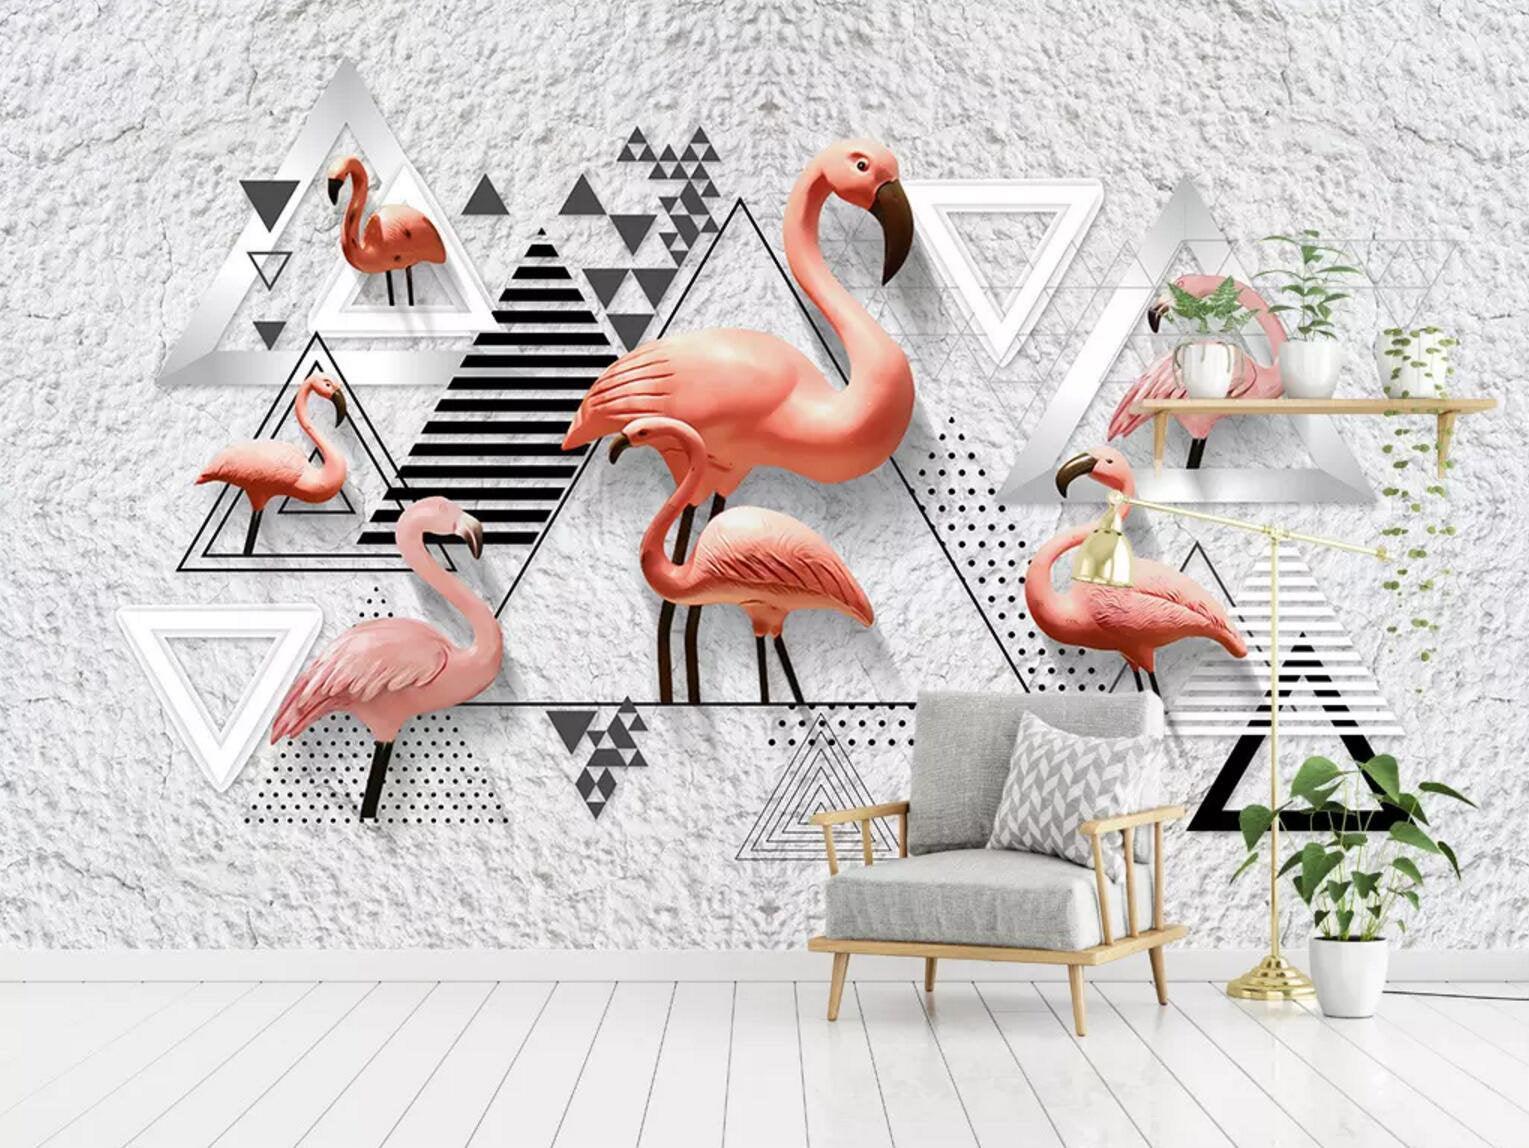 3D Abstract graphics, Relief, Flamingos Wallpaper, Removable Self Adhesive Wallpaper, Wall Mural, Vintage art, Peel and Stick- Jess Art Decoration